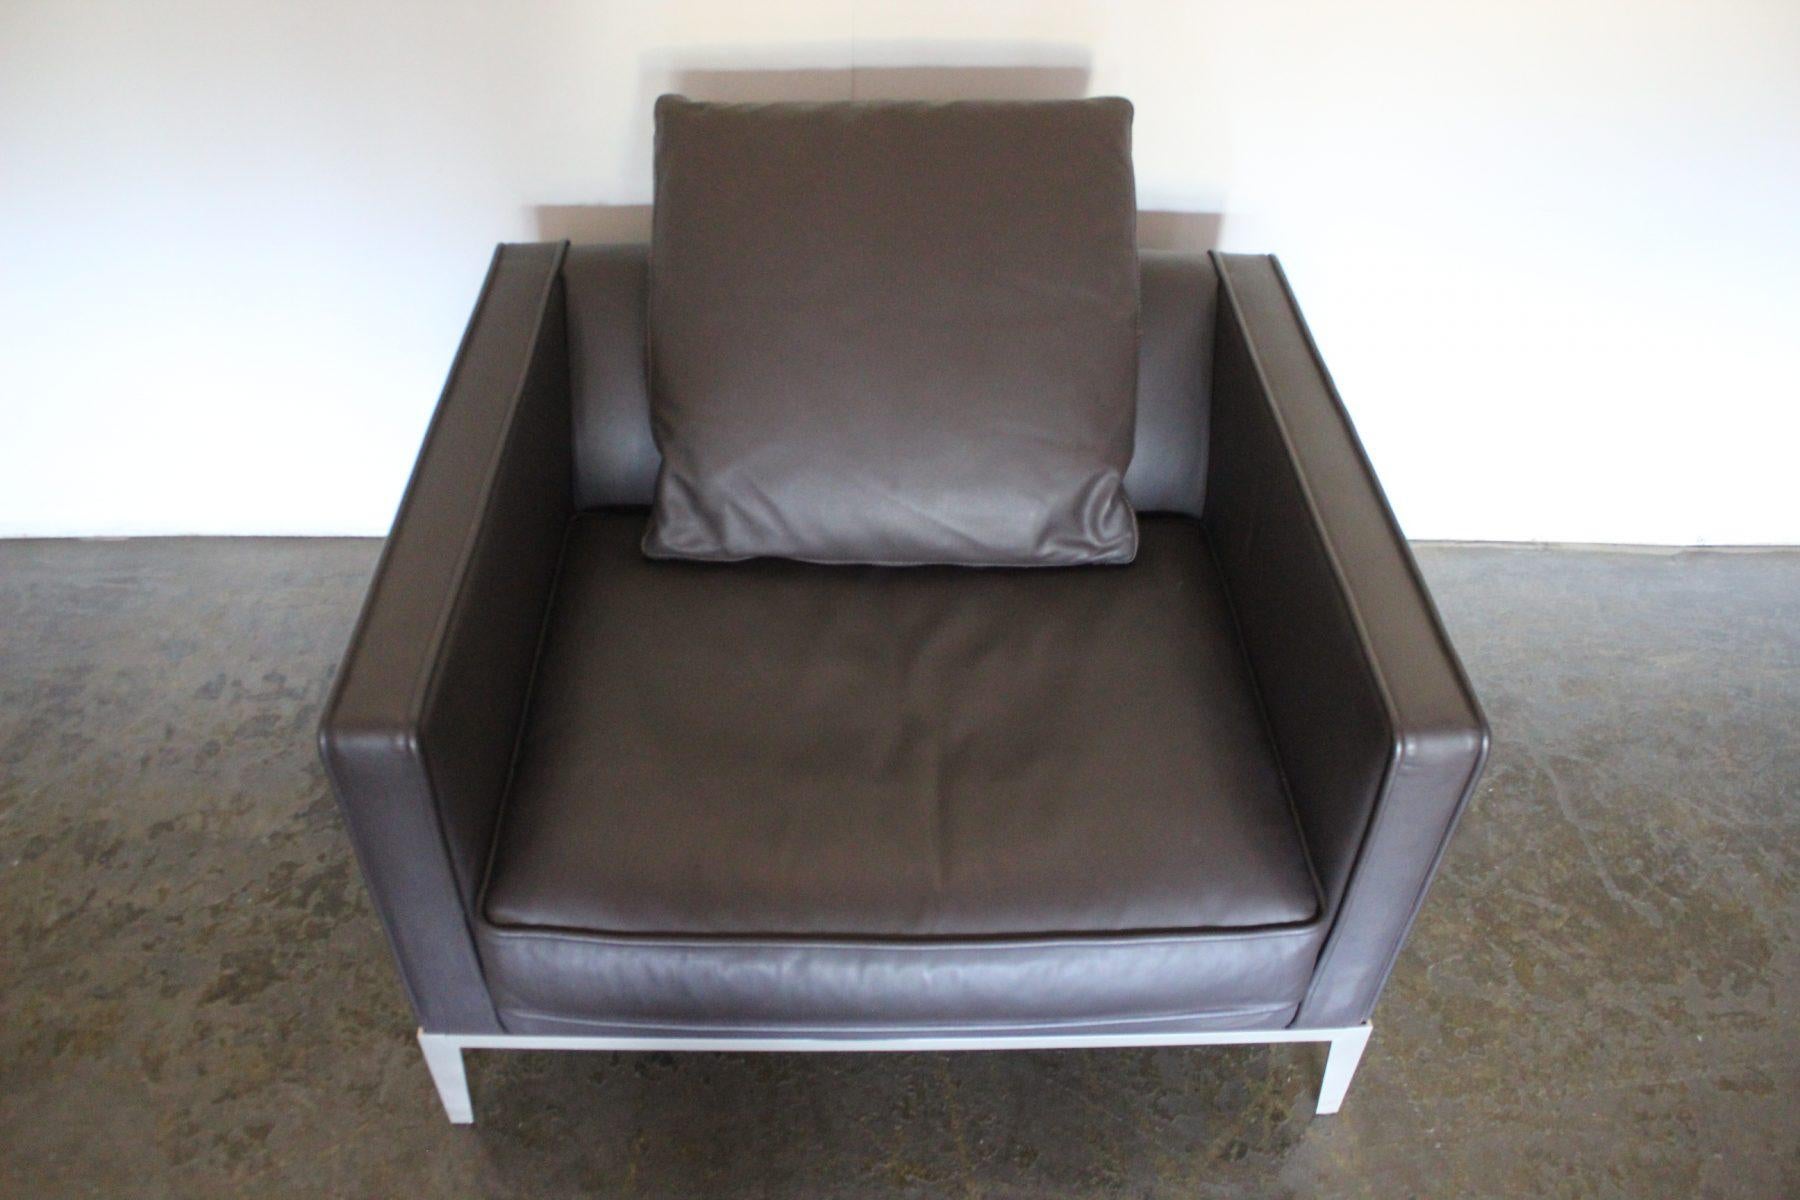 Contemporary Mint B&B Italia “Simplice” Large Armchair in “Gamma” Dark-Brown Leather For Sale